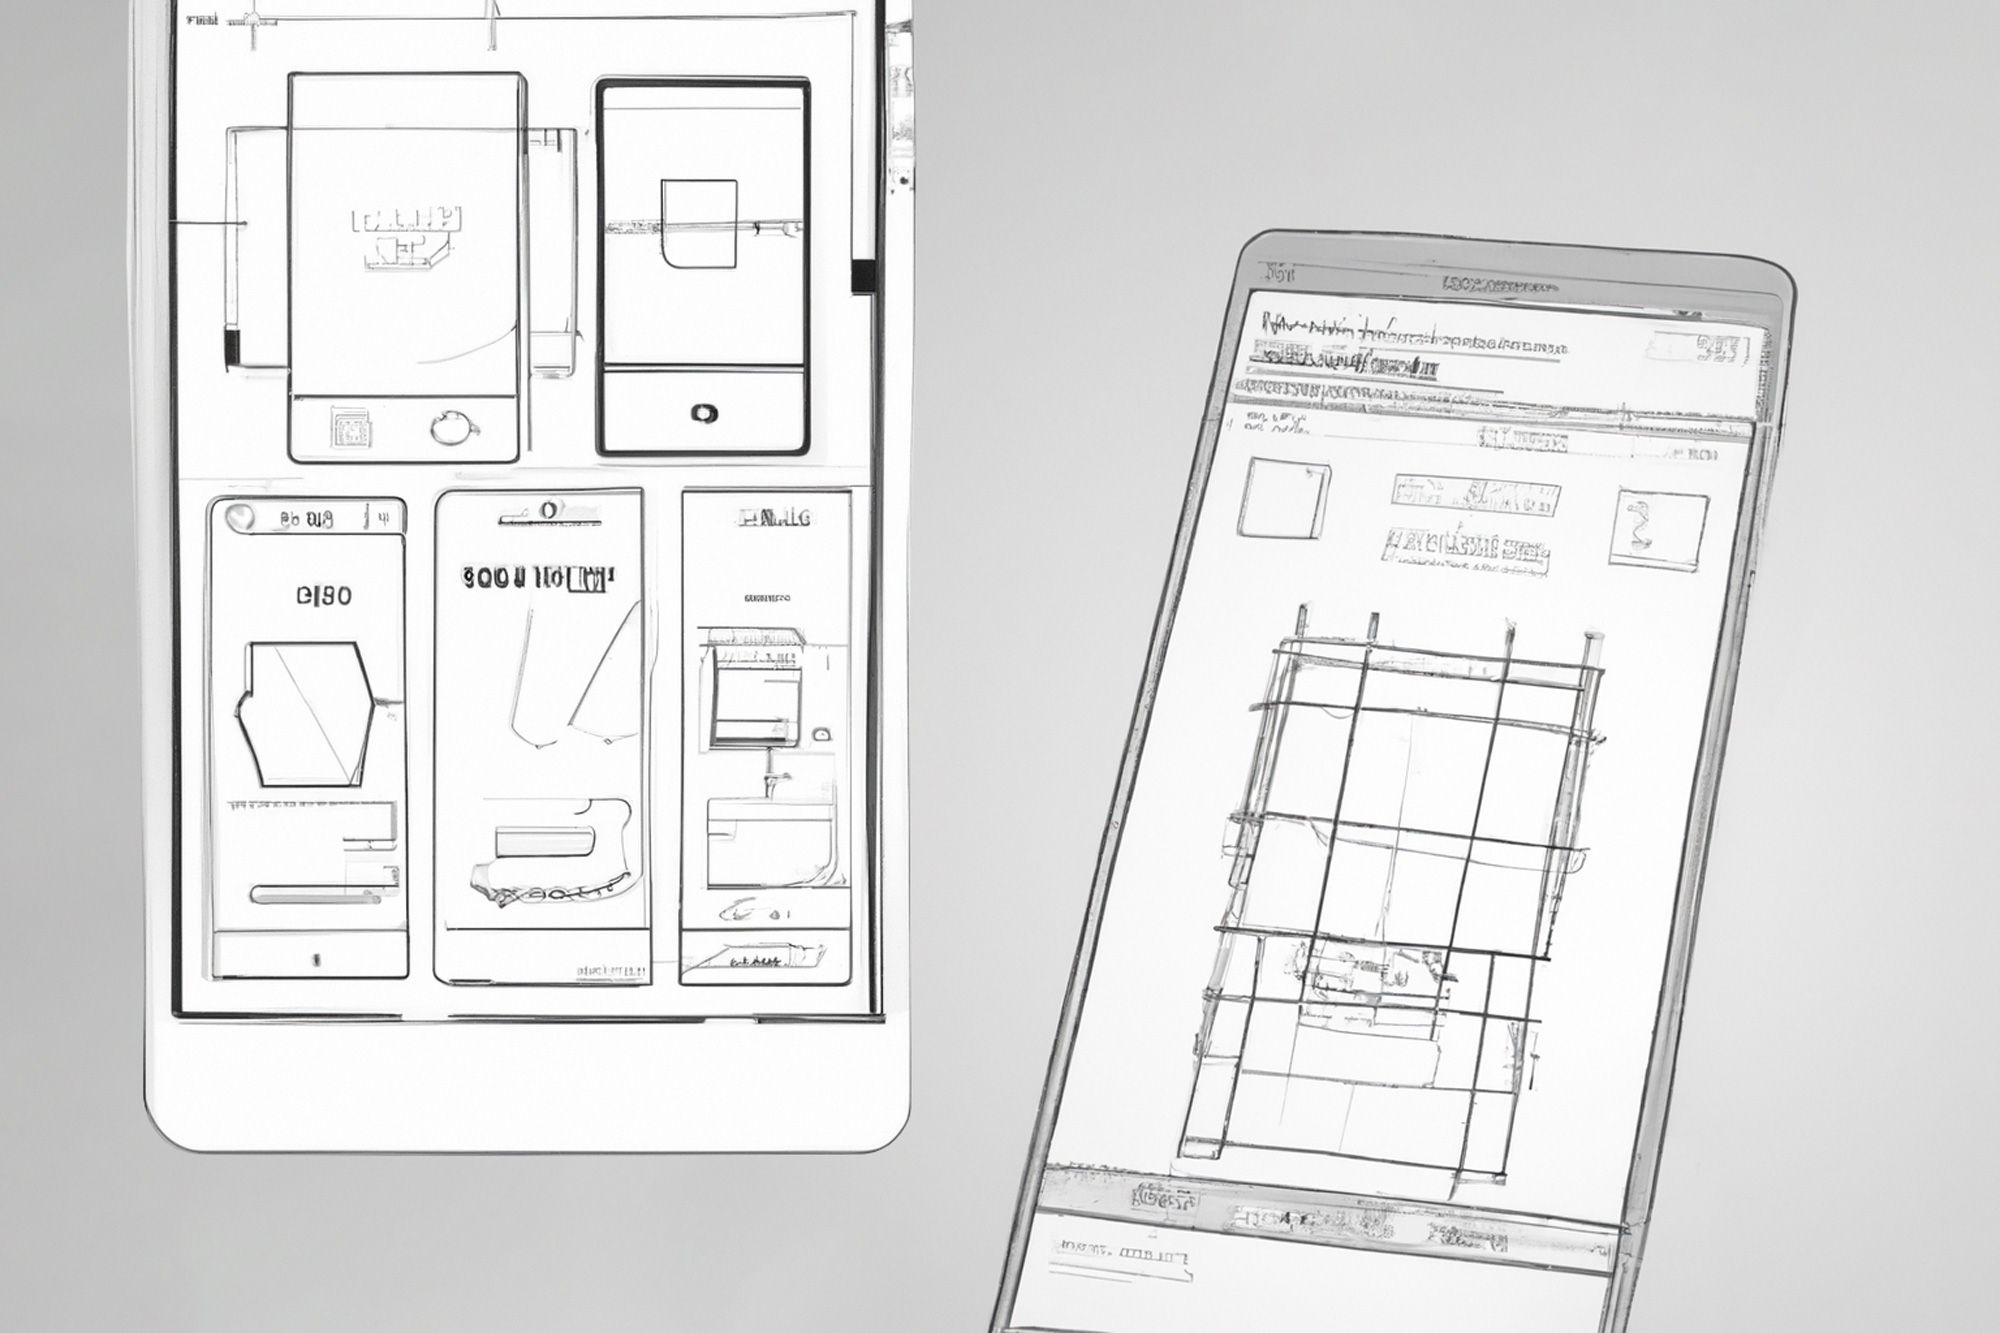 Responsive design explained simply